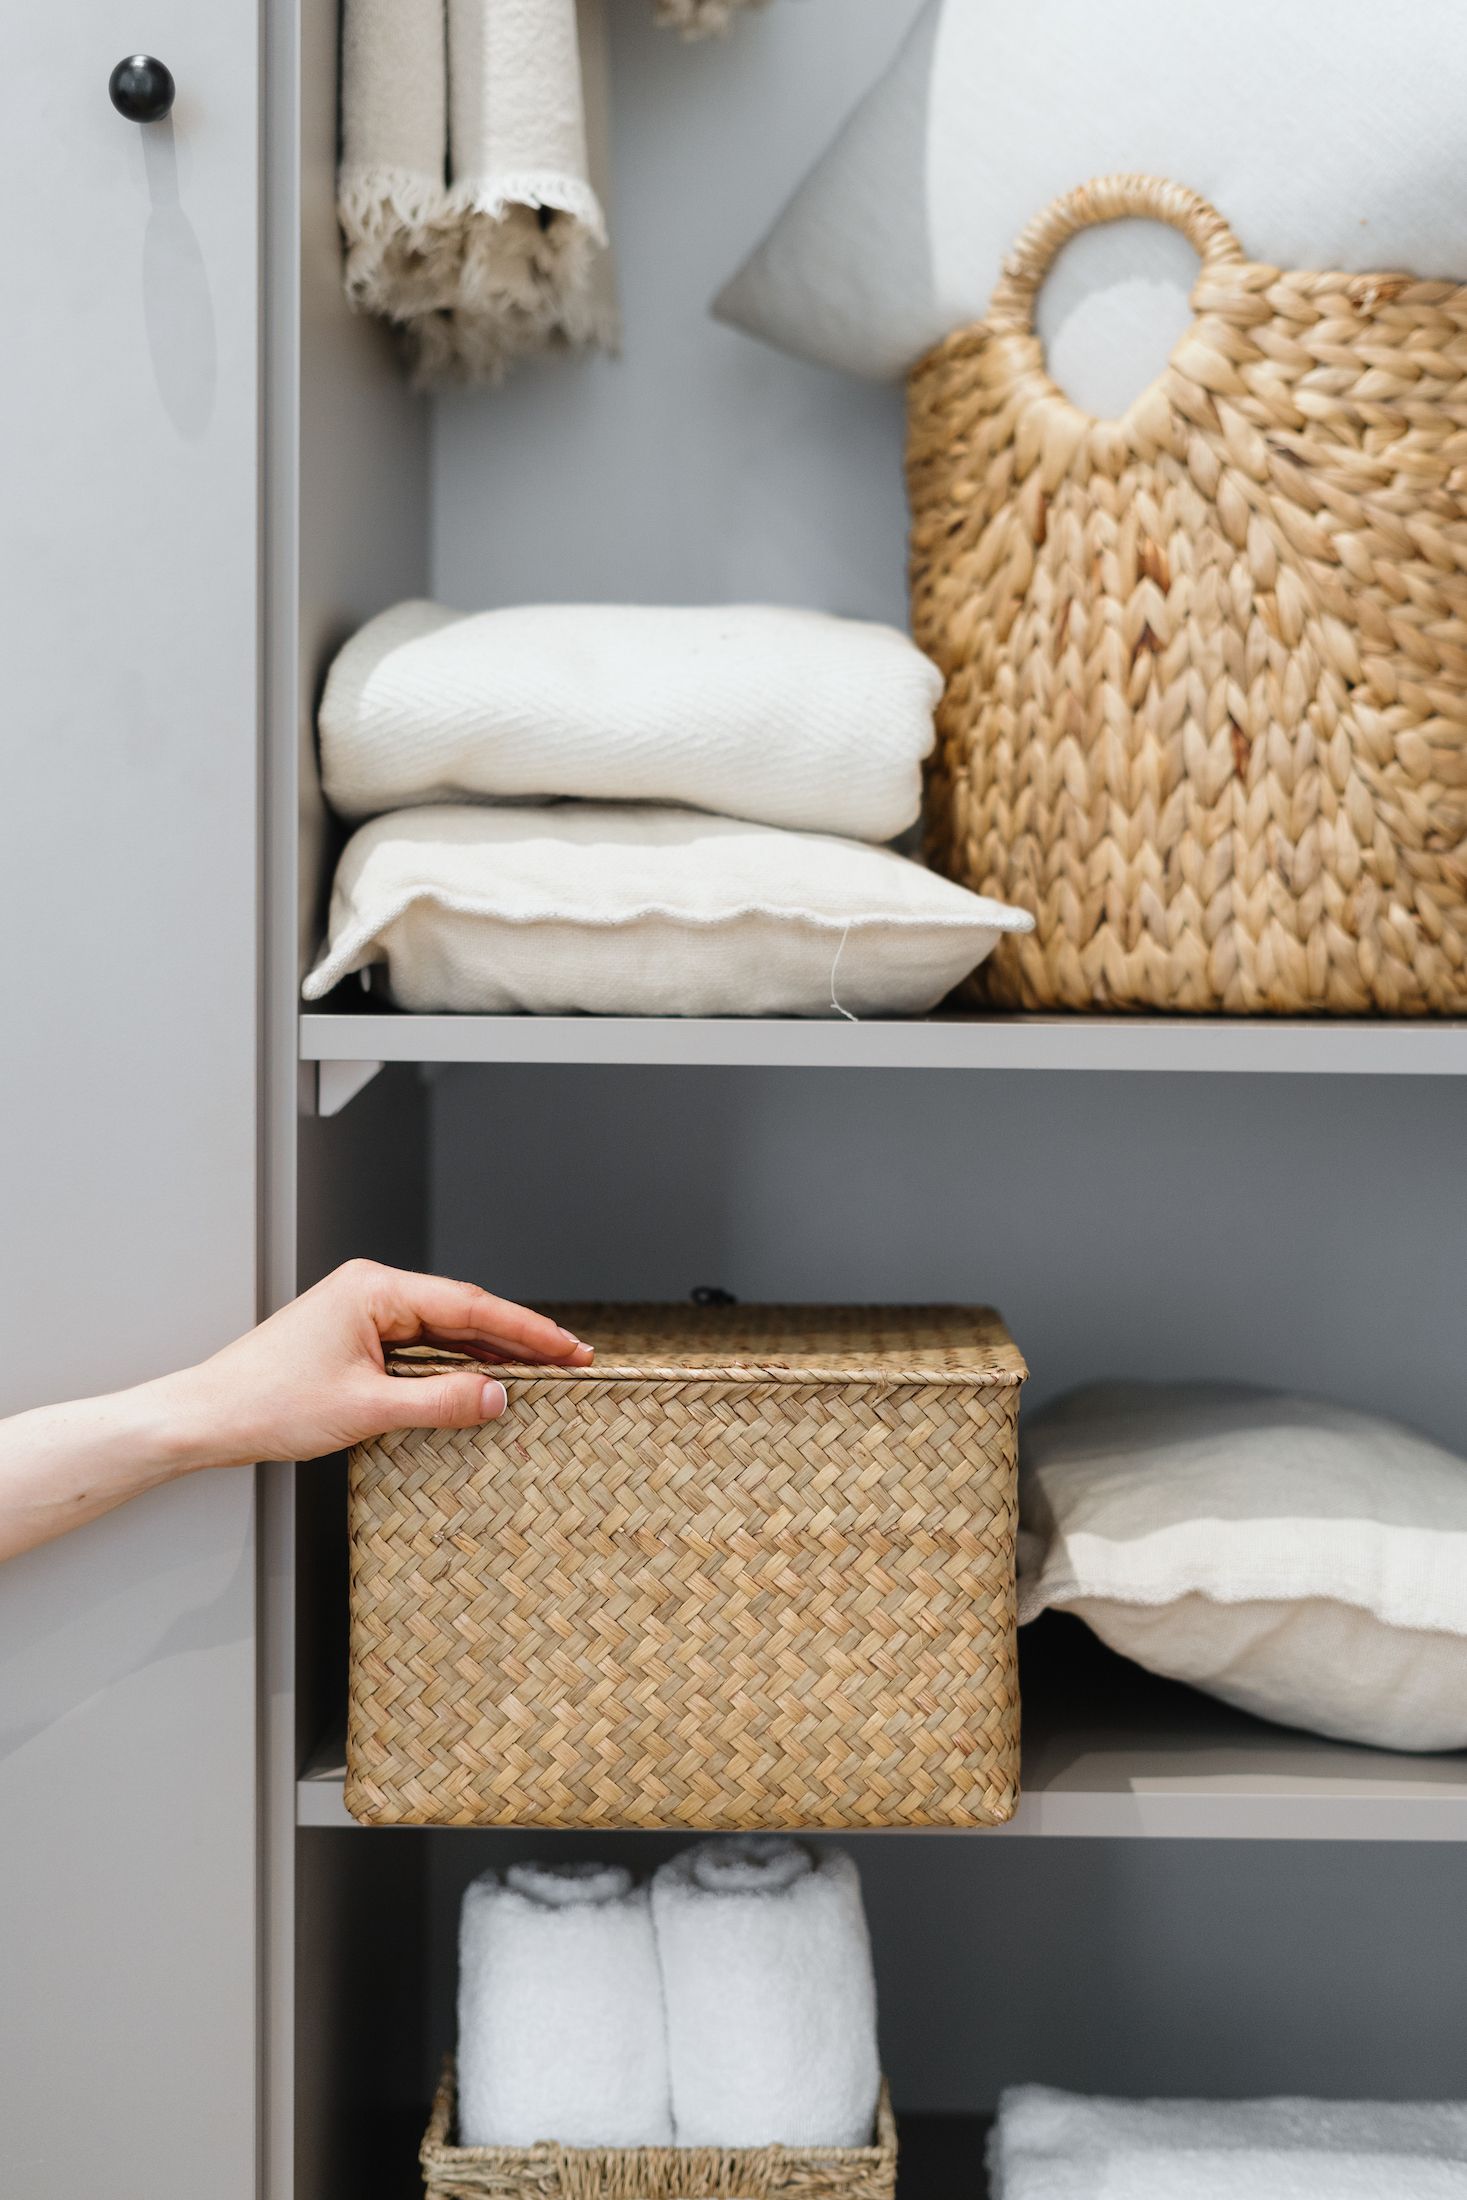 How To Organize Your Home?  Easy Steps For Sustainable Organizing